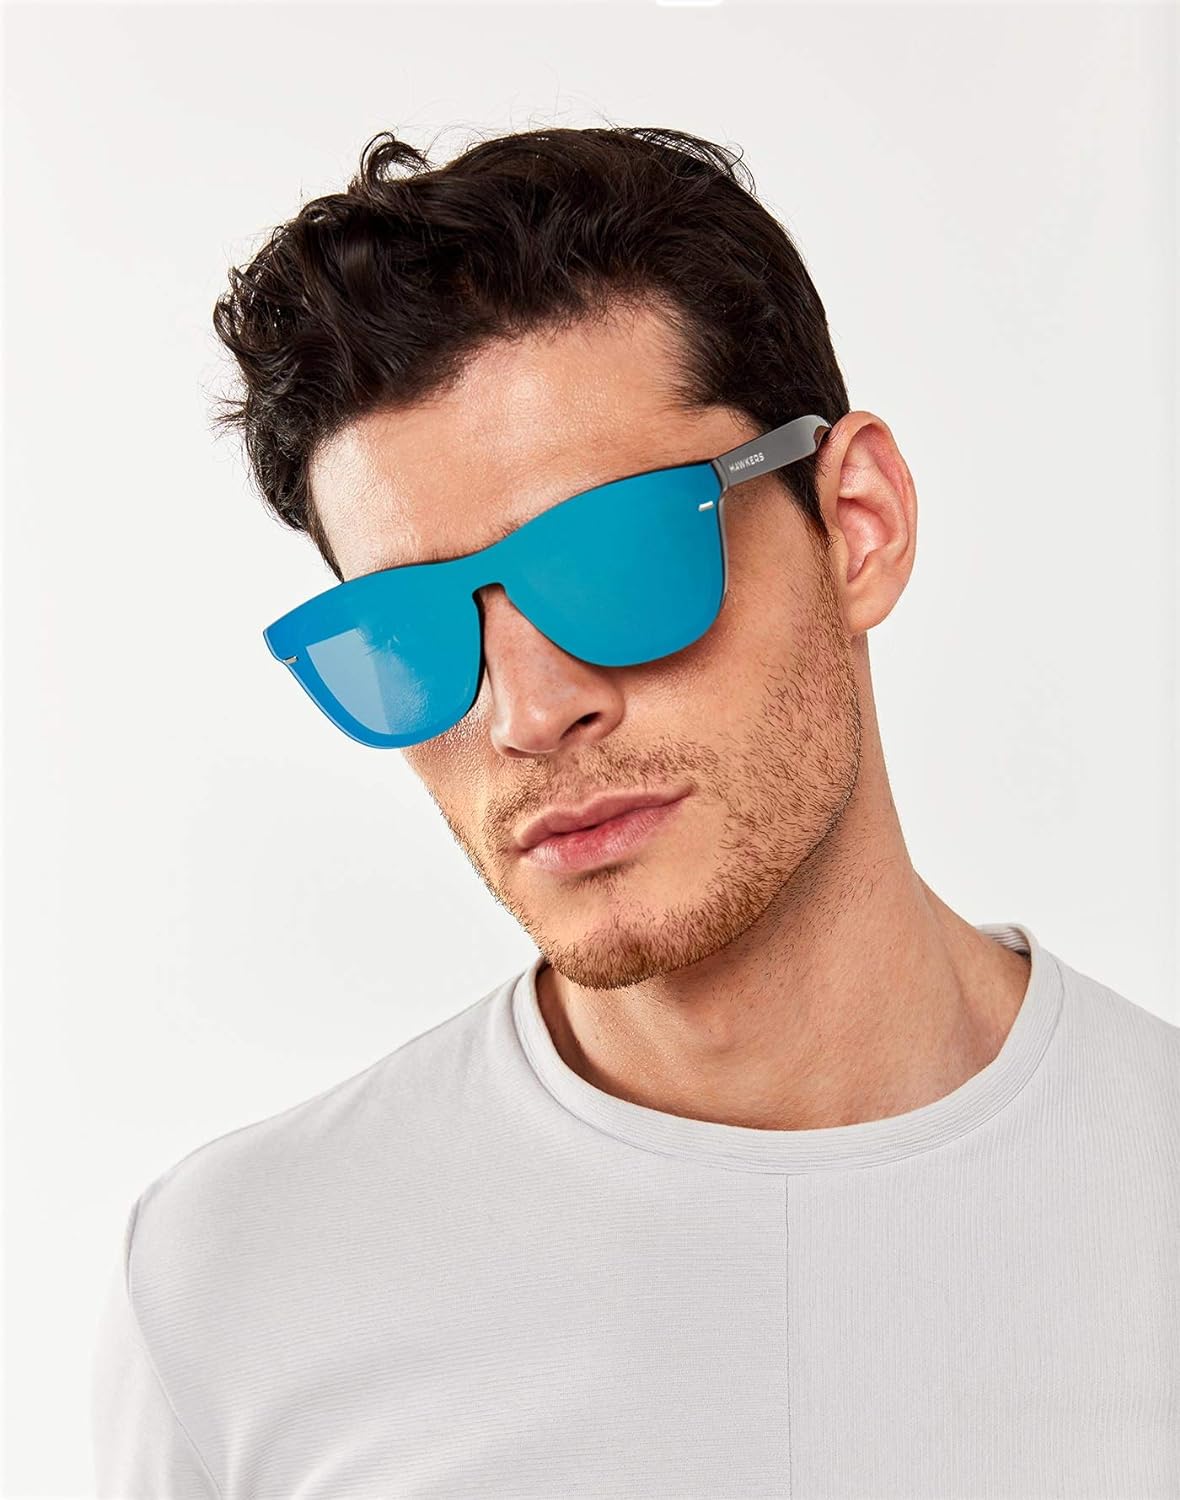 KÍNH MÁT HAWKERS CLEAR BLUE ONE VENM HYBRID SHINY BLACK FRAME AND BLUE SKY MIRRORED MASK LENS 10